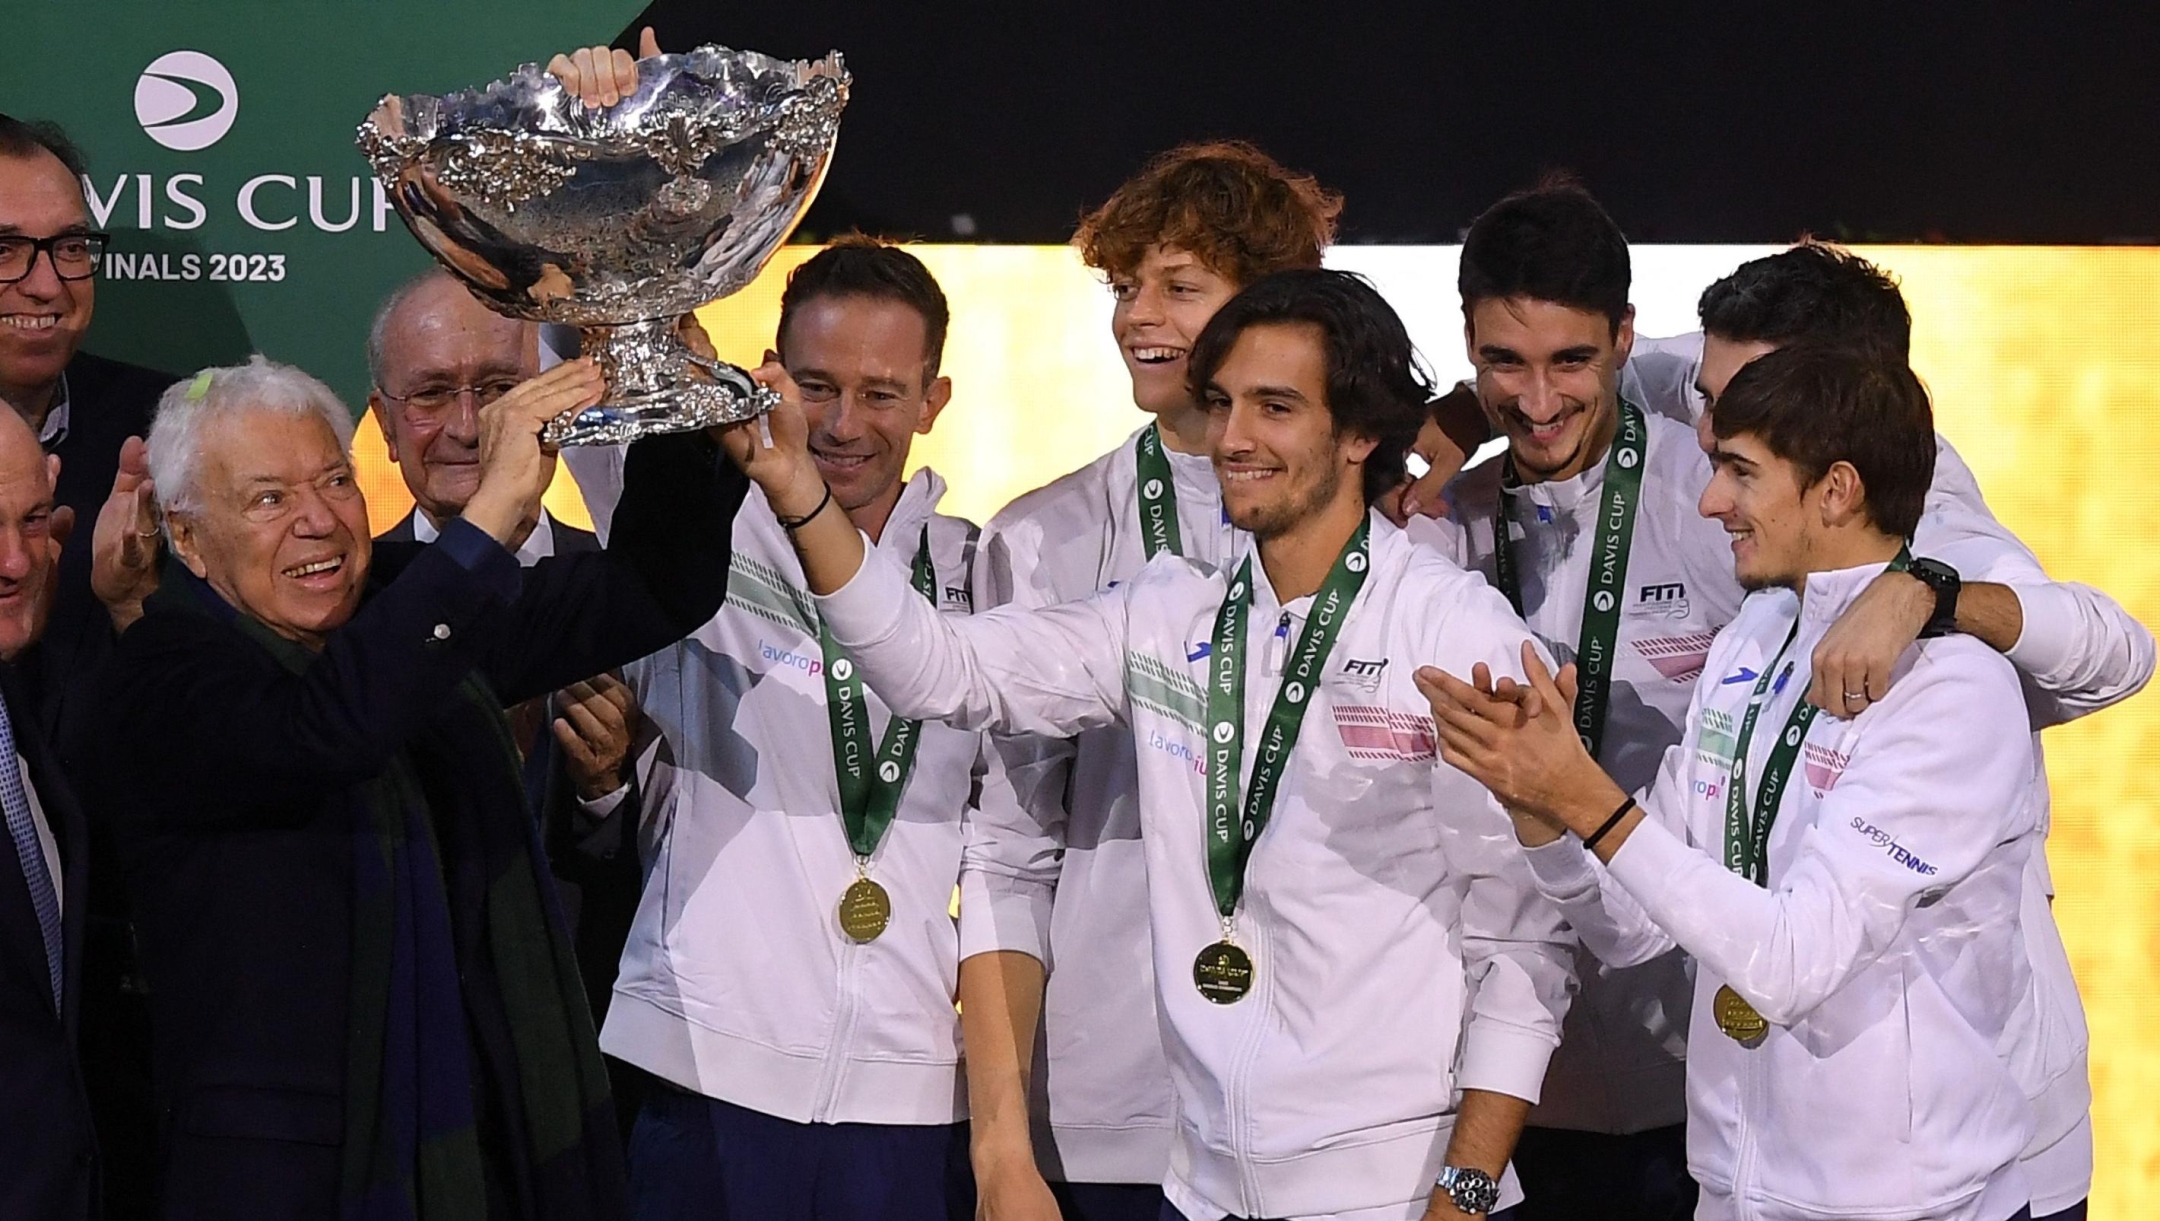 Italian tennis legend Nicola Pietrangeli (L) raises the trophy as he celebrates with the members of team Italy winning the Davis Cup tennis tournament at the Martin Carpena sportshall, in Malaga on November 26, 2023. (Photo by JORGE GUERRERO / AFP)